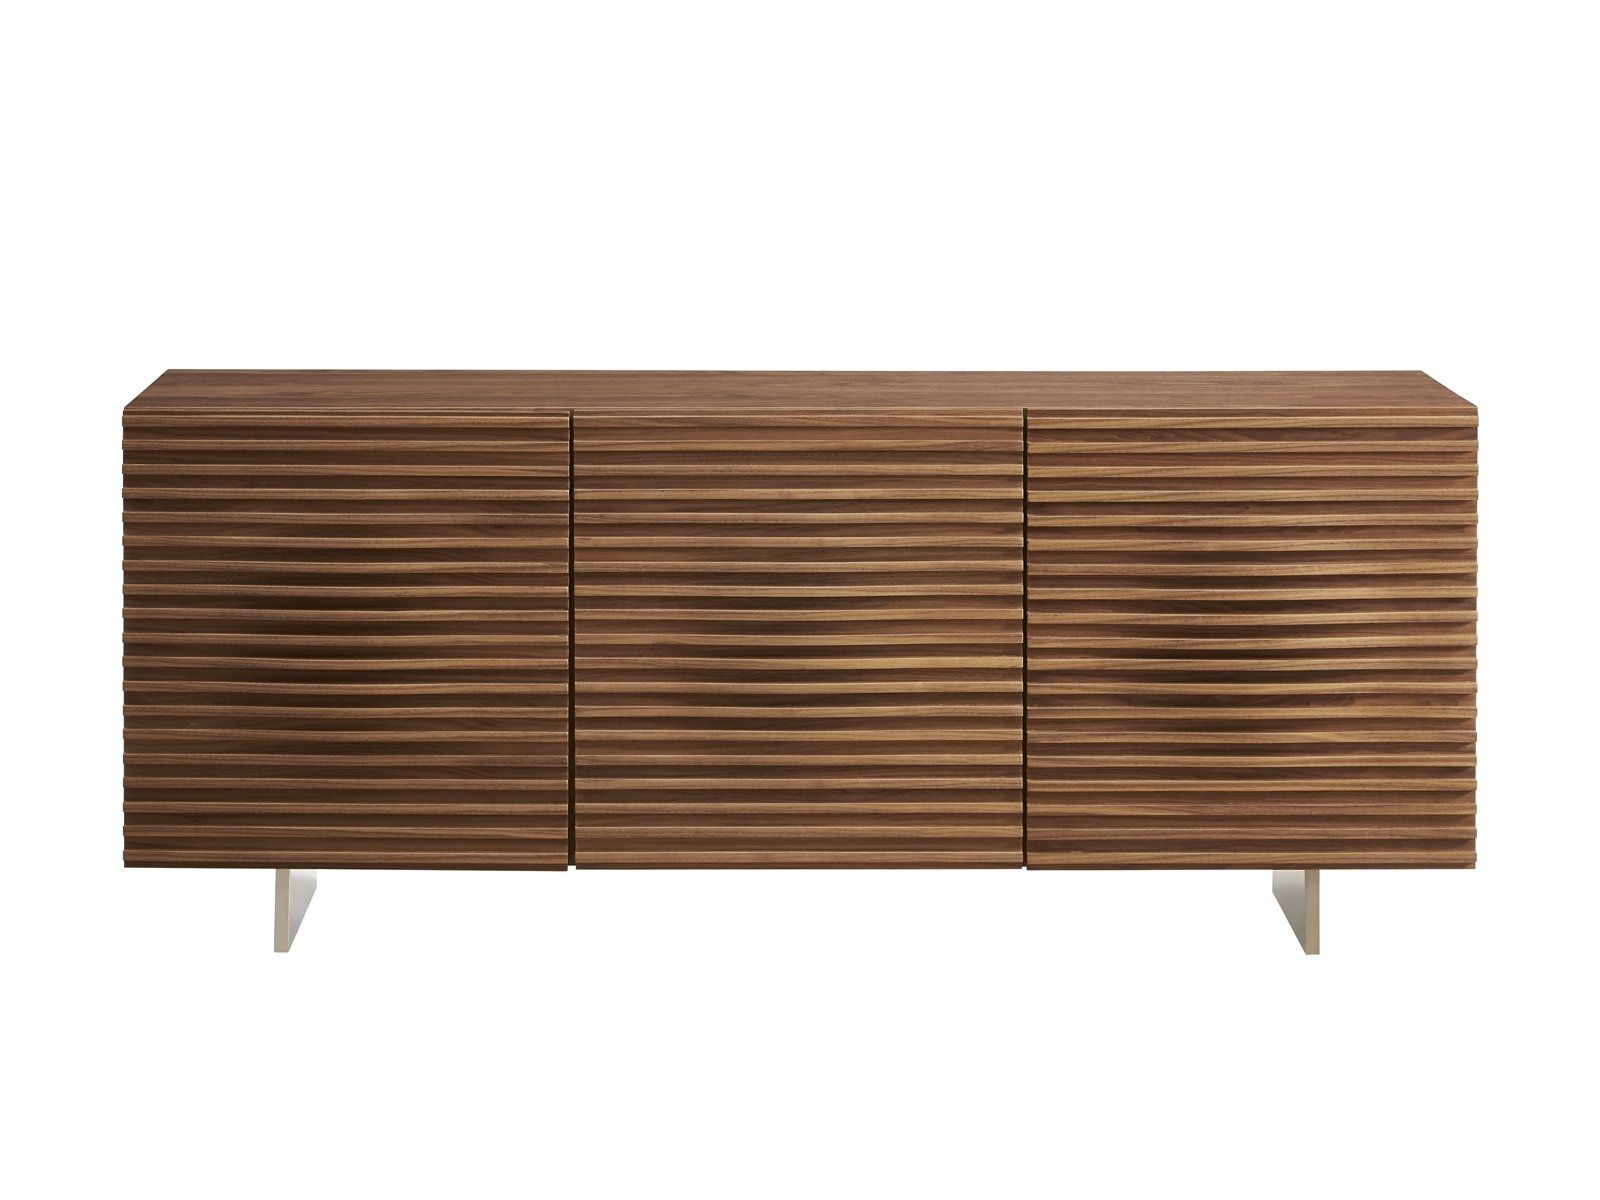 Blansett Sideboard & Reviews | Allmodern Pertaining To Most Recent Amos Buffet Sideboards (View 19 of 20)